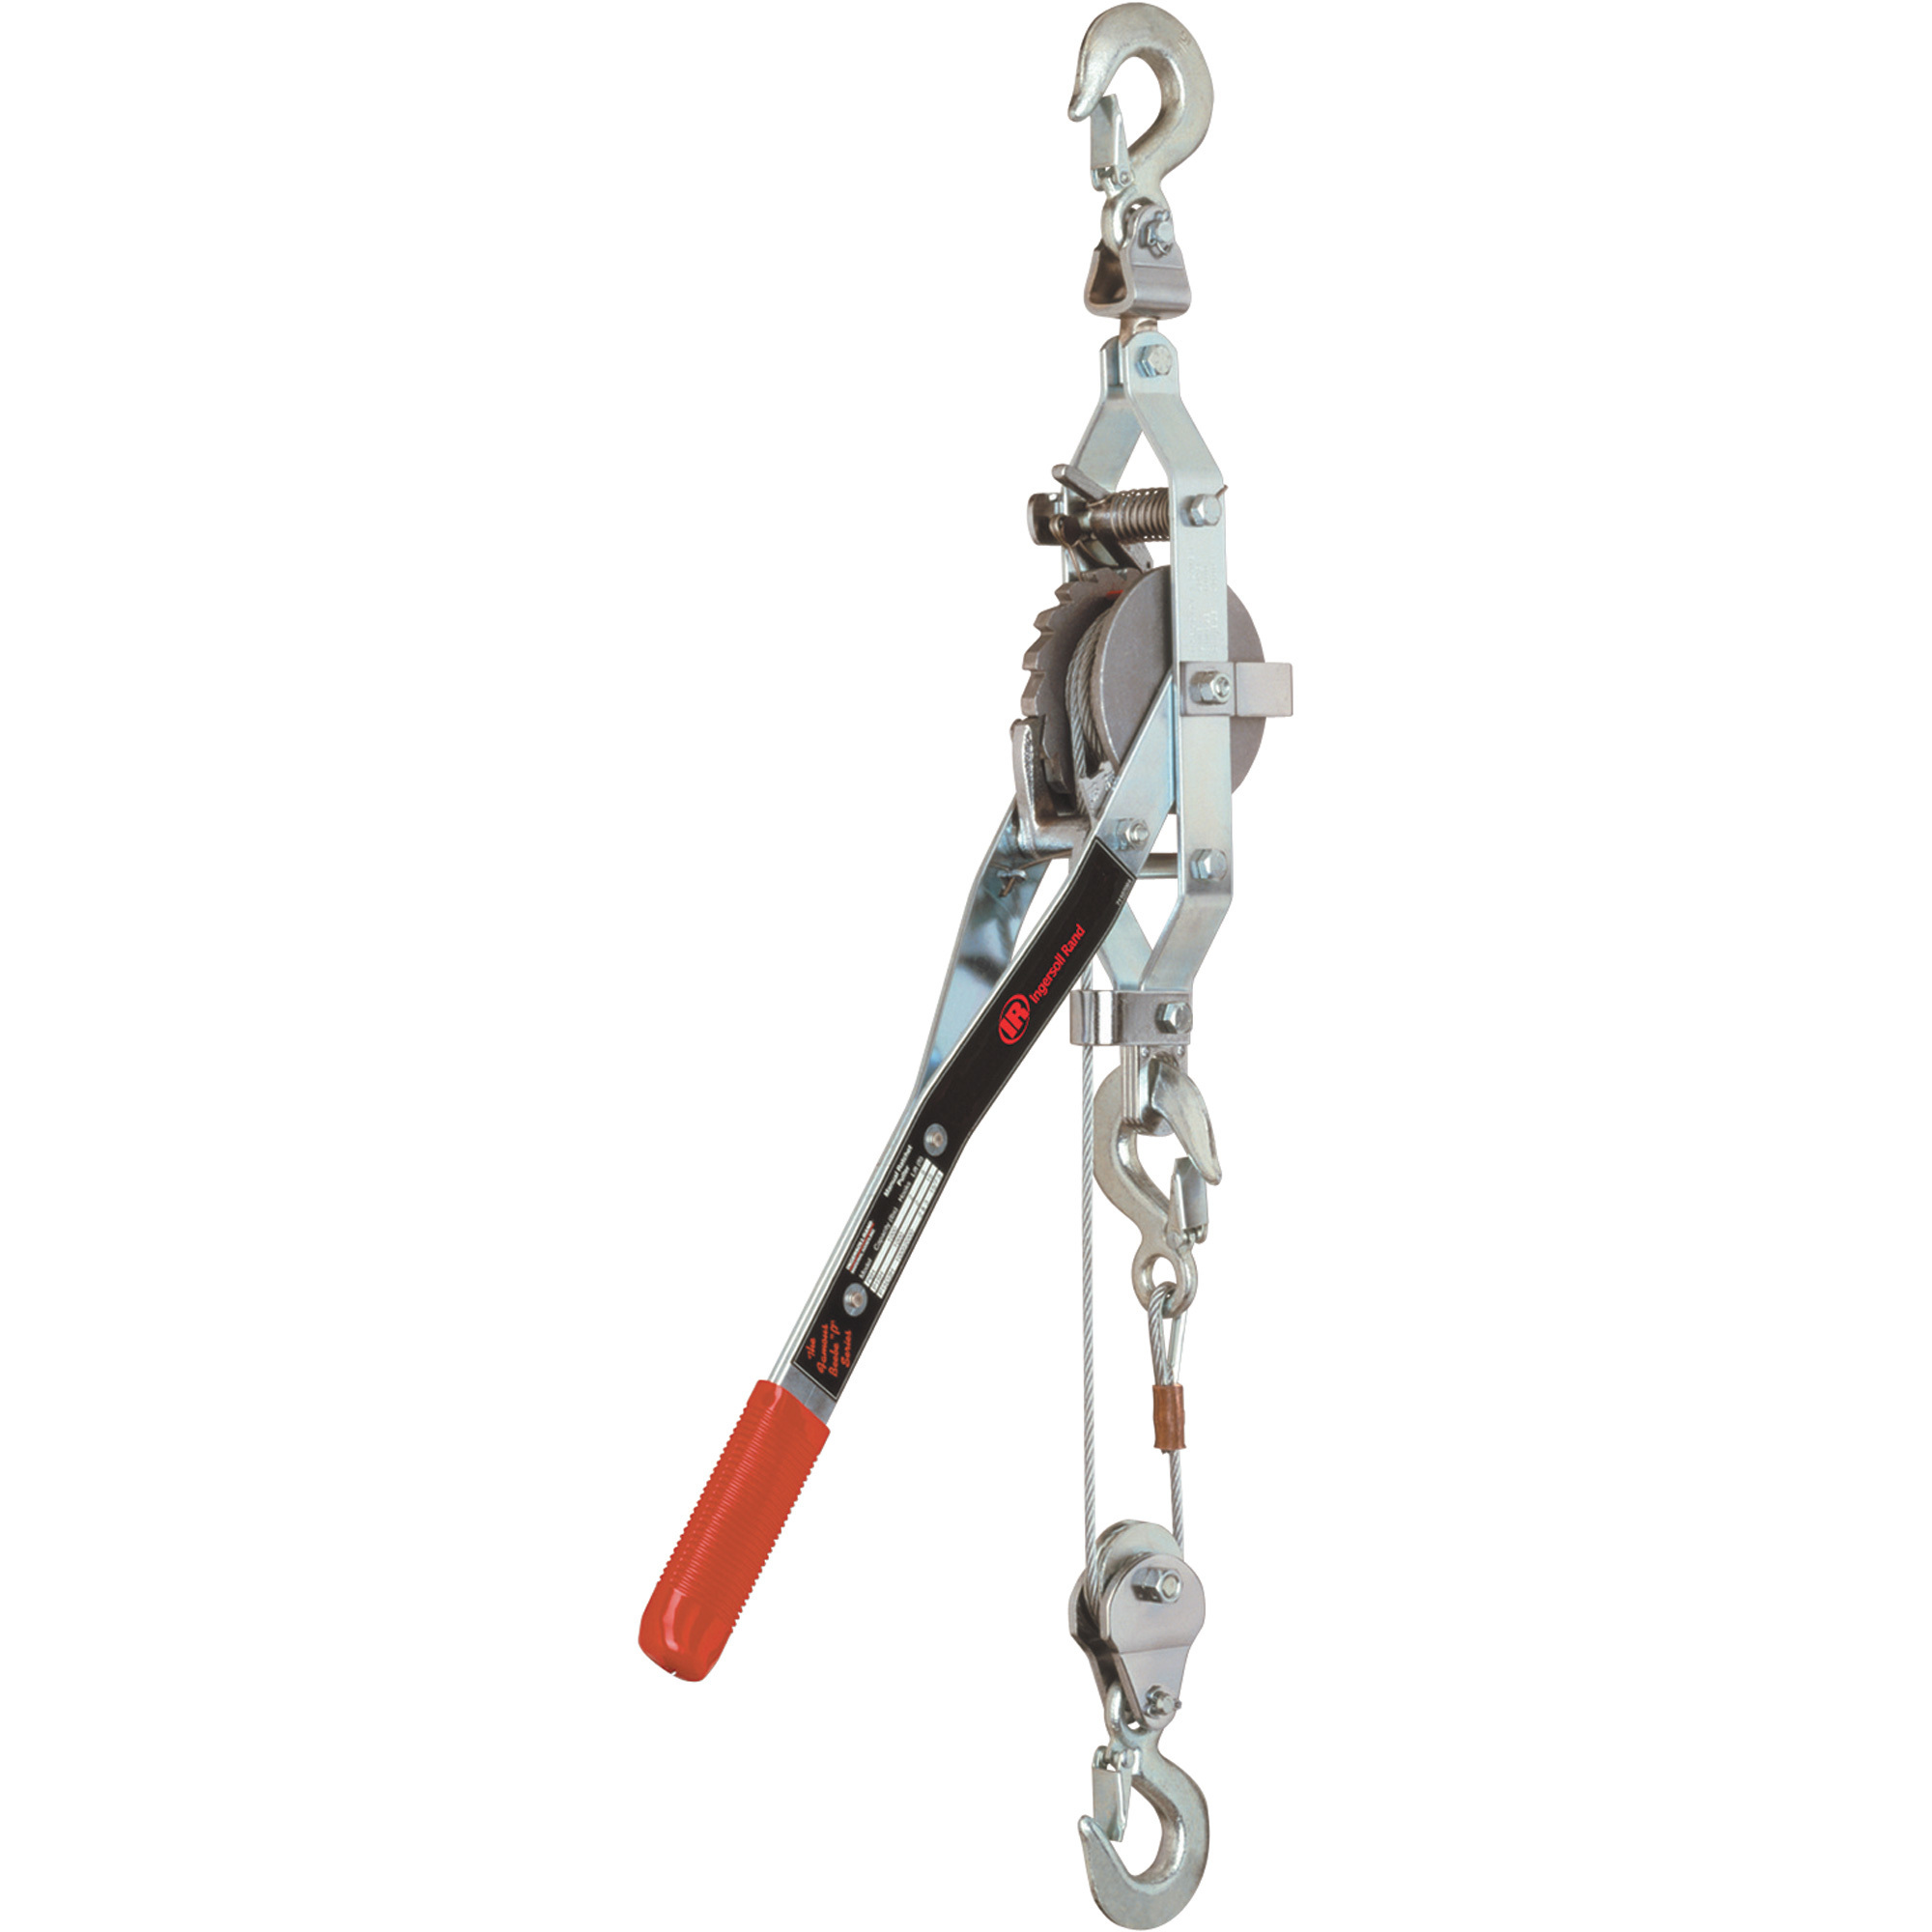 Ingersoll Rand Wire Rope Puller, 1,000/2,000-Lb. Capacity,15ft./7.5ft. Lift, 3/16Inch Load Chain Diameter, Model P15D3H